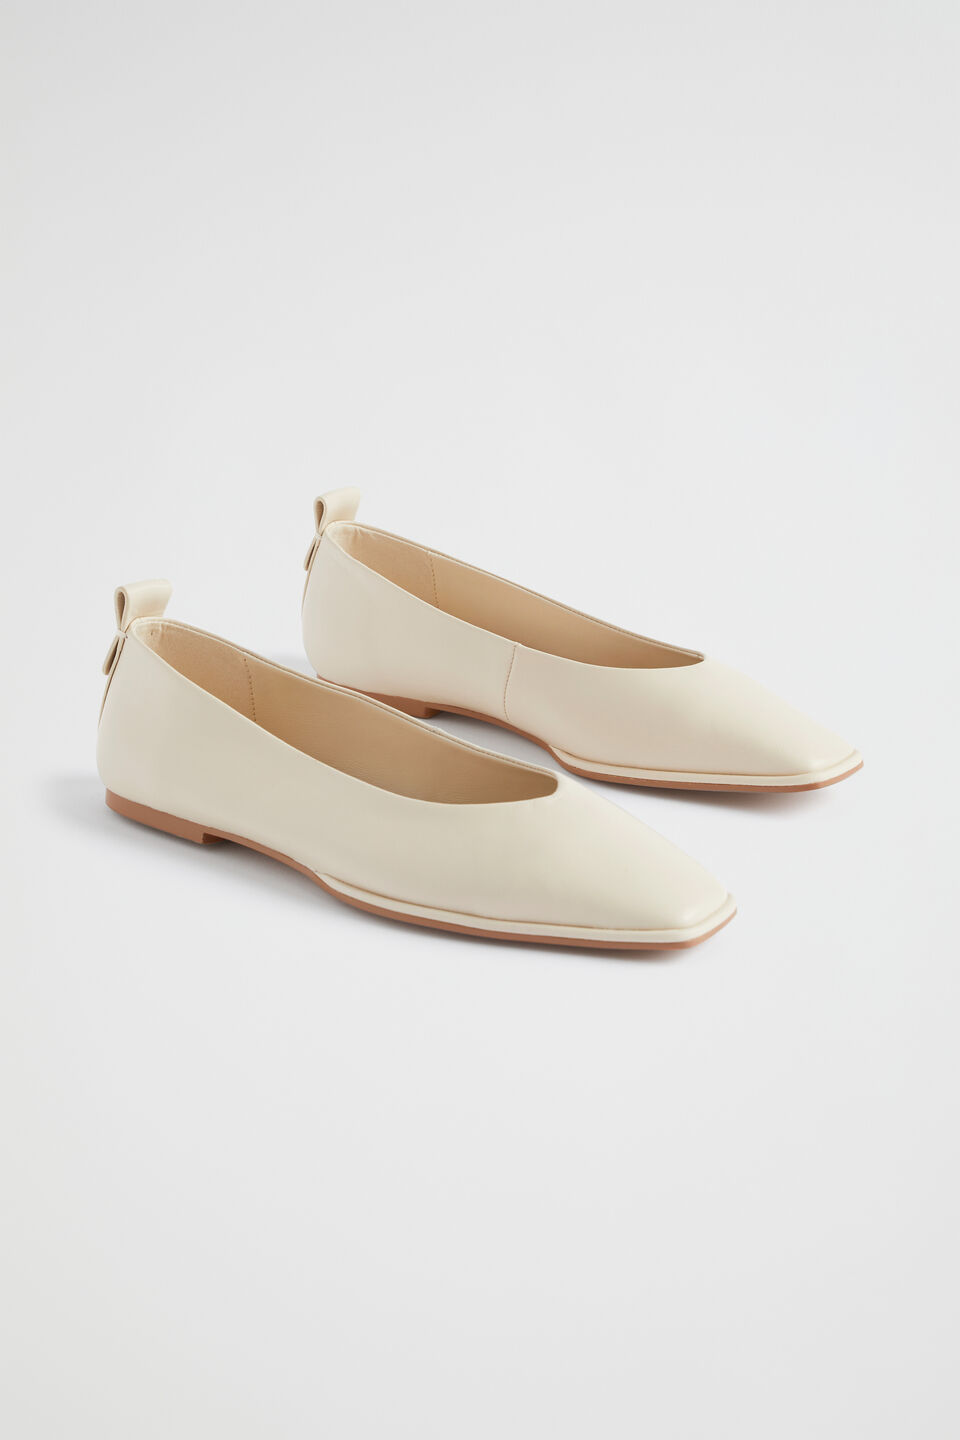 Camille Ballet Flat | Seed Heritage